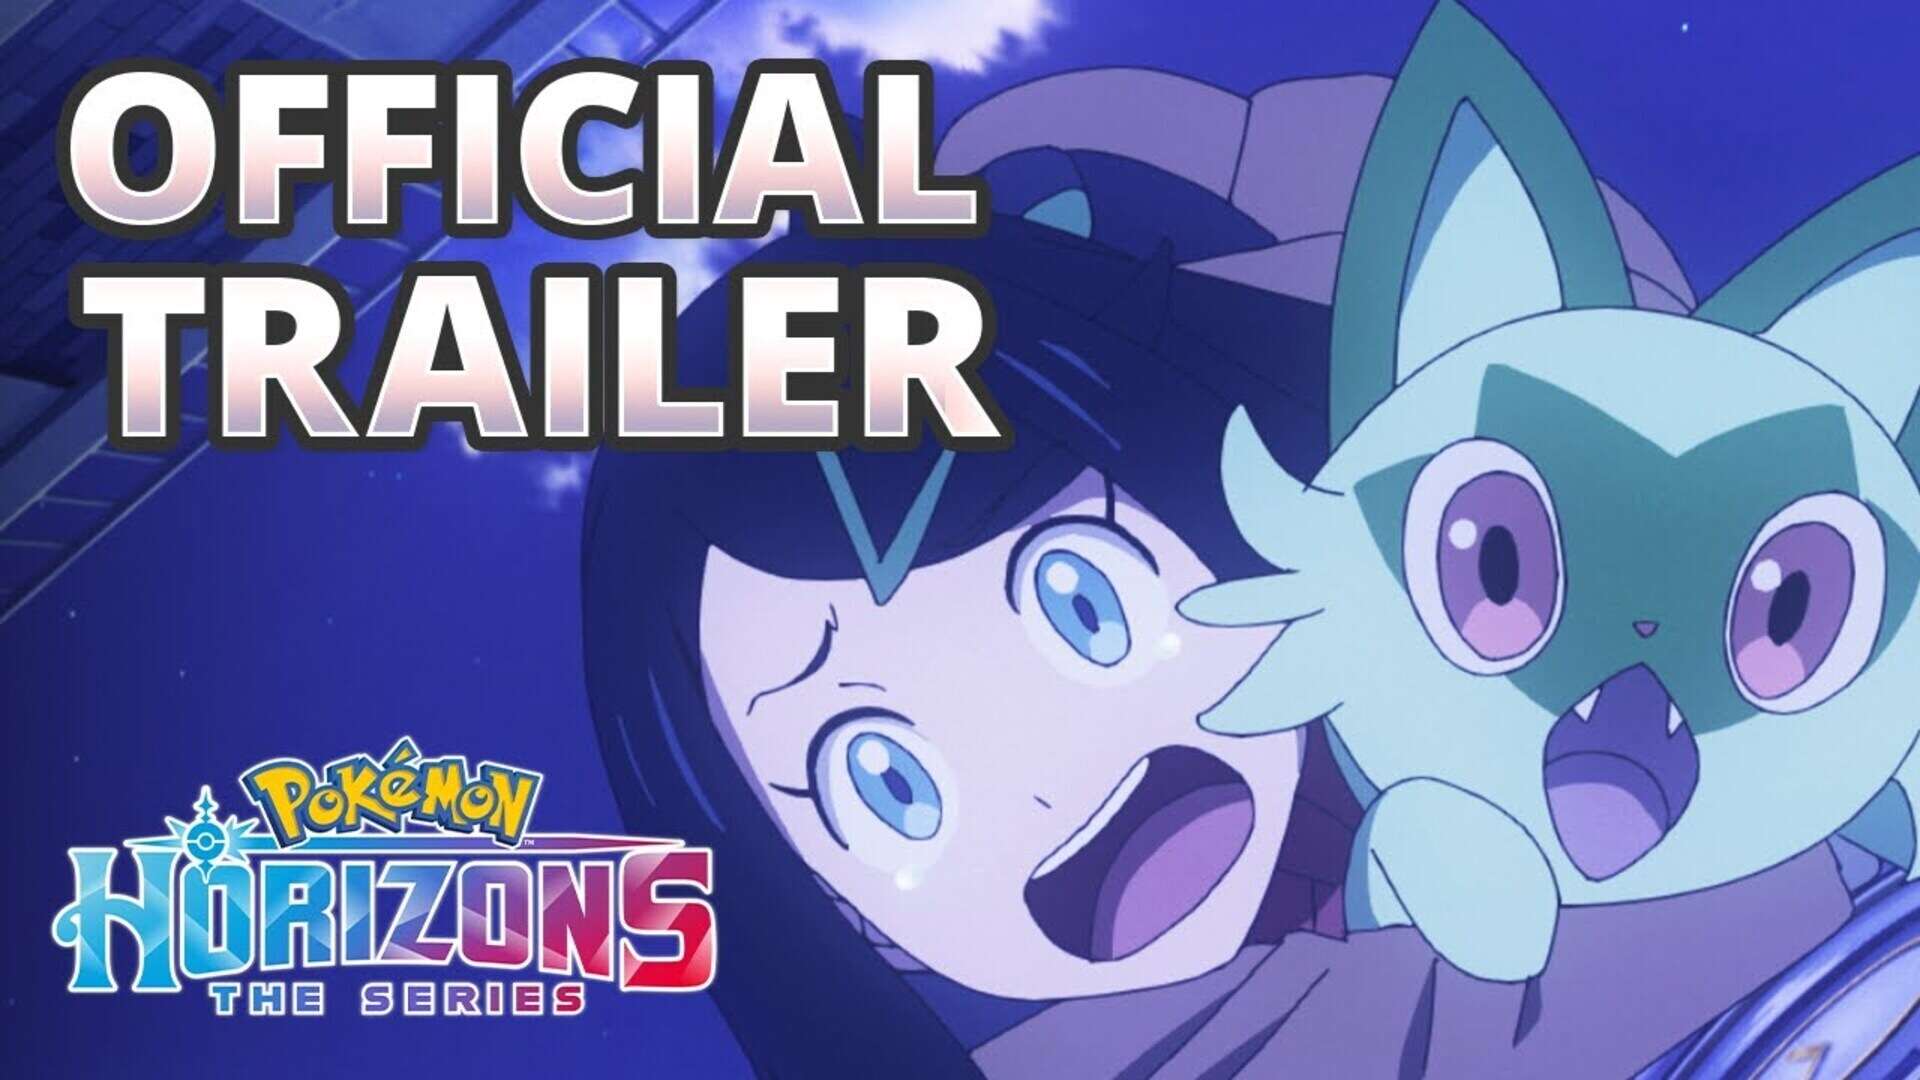 Pokemon Horizons: The Series Anime get Manga Spinoff and Prepare for Laughter and Adventure